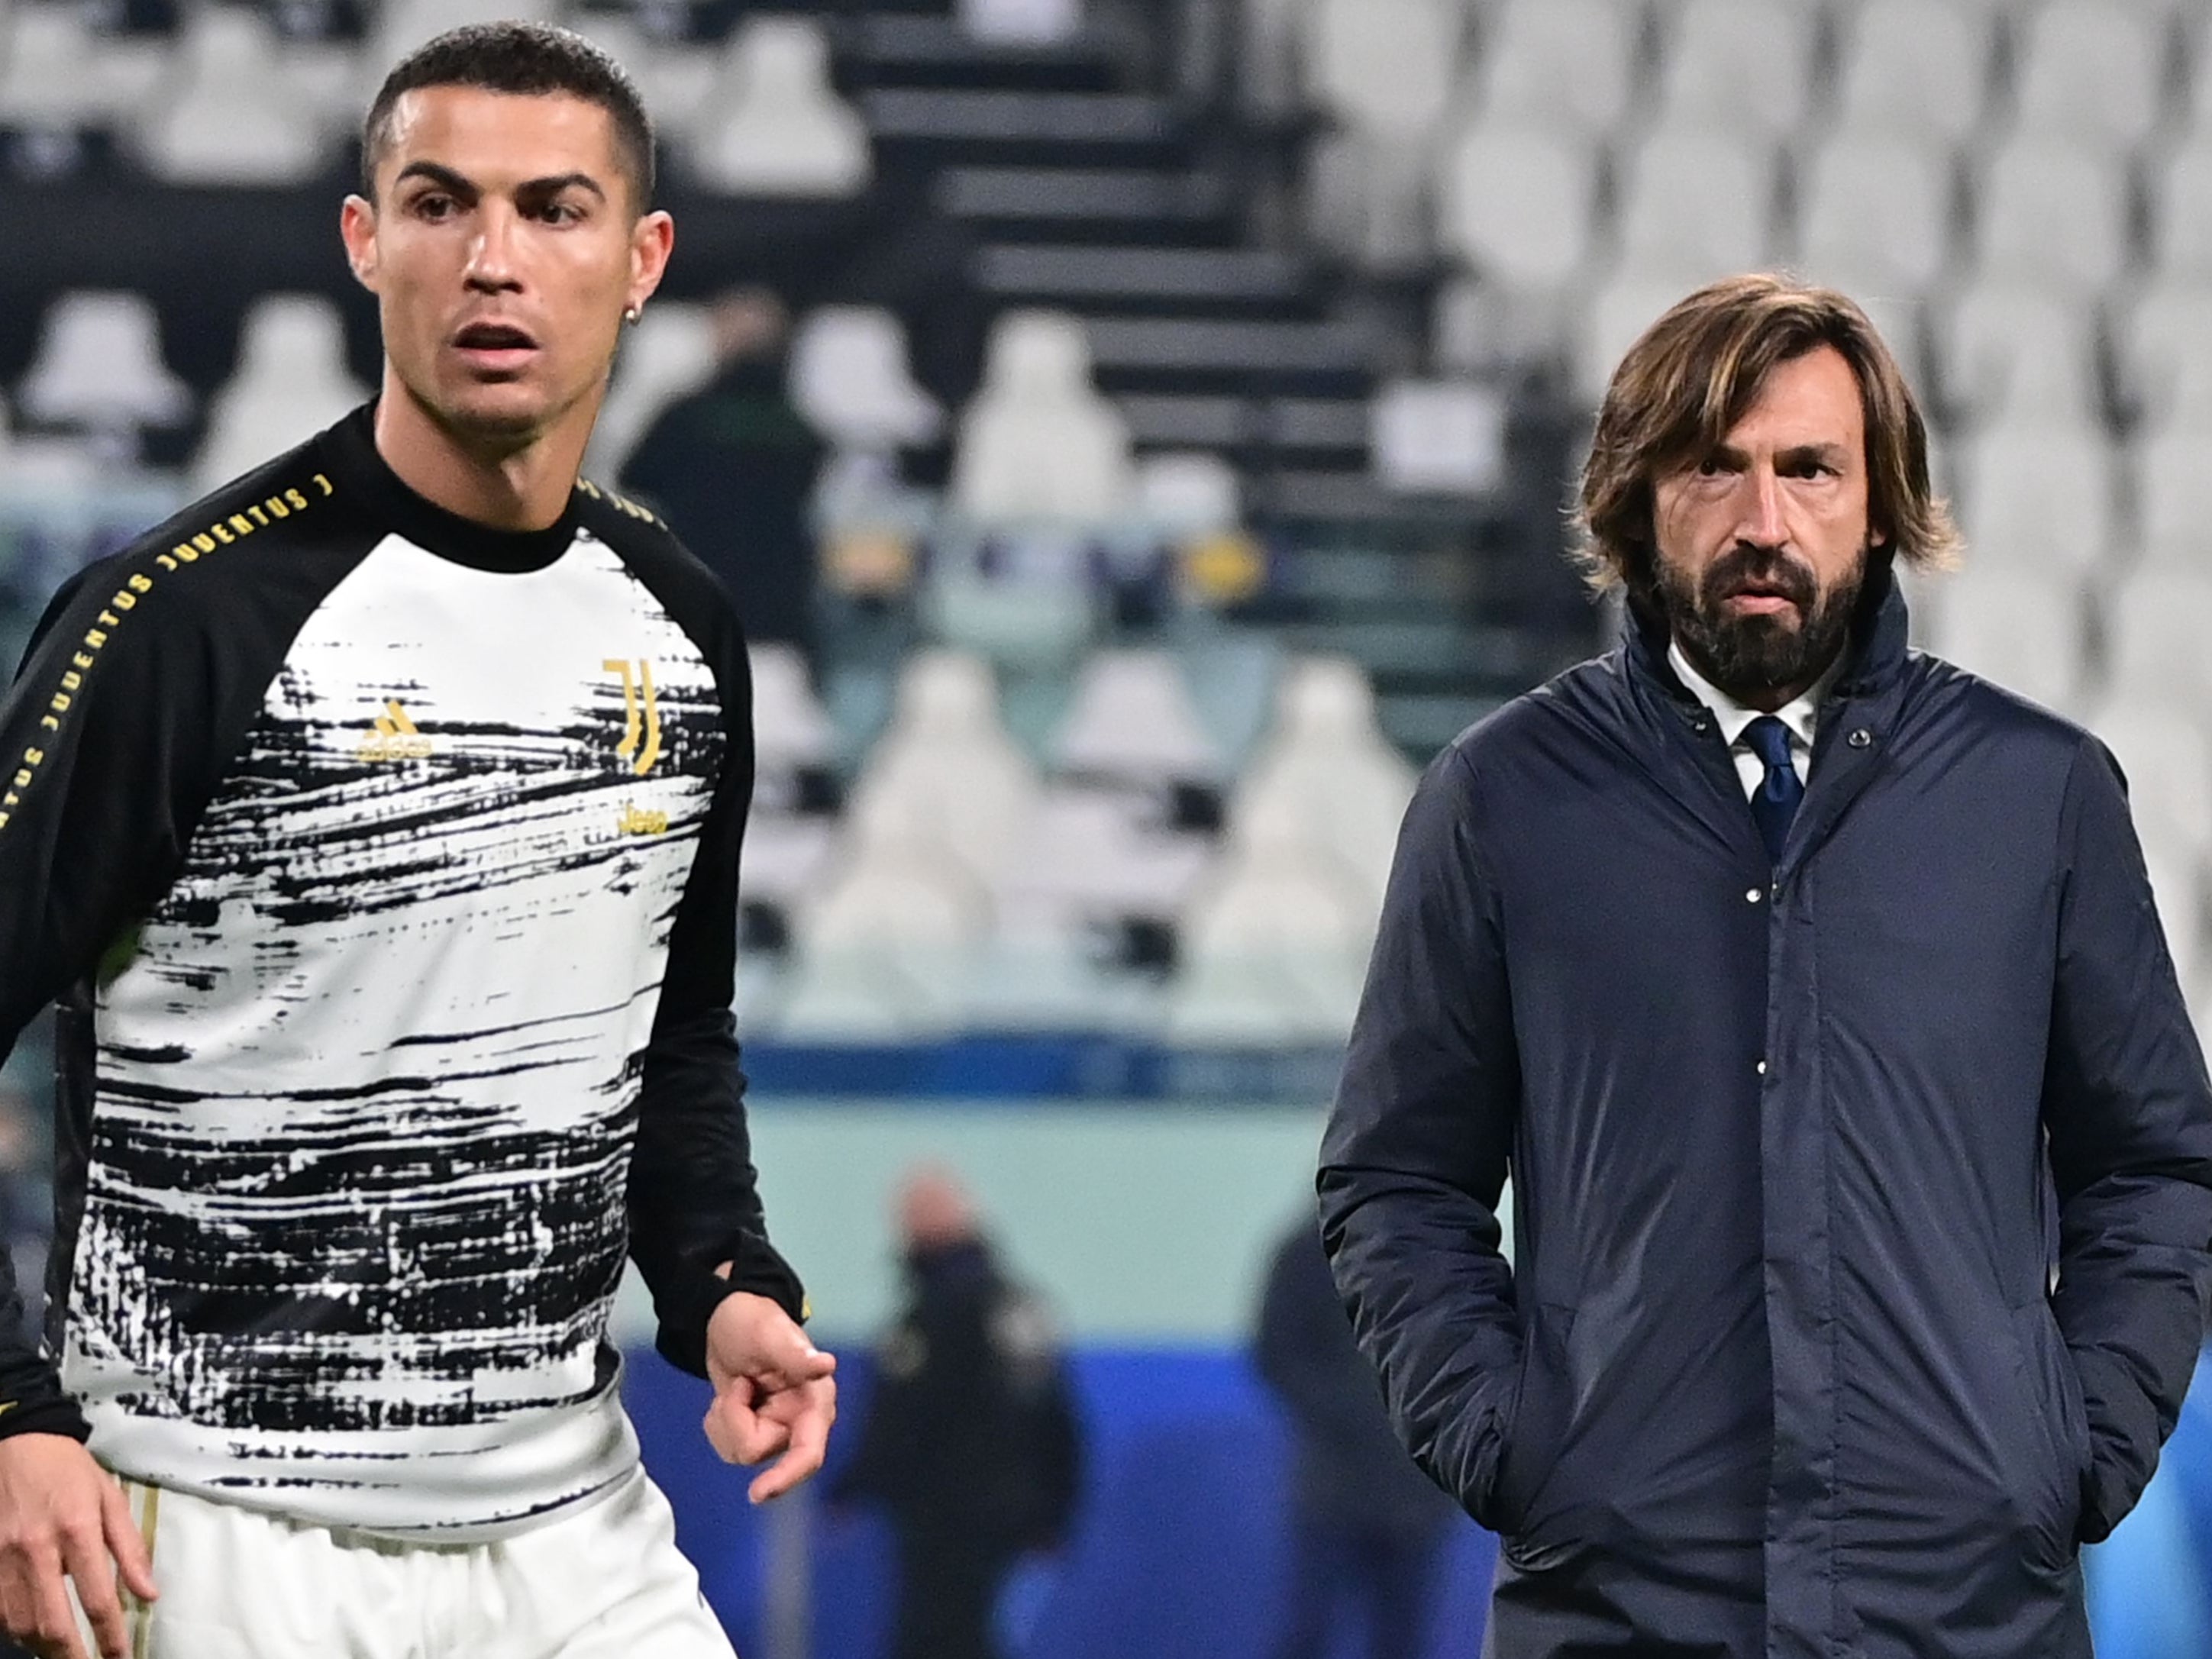 Cristiano Ronaldo and Andrea Pirlo stay Juventus despite poor season, confirms Pavel Nedved | The Independent